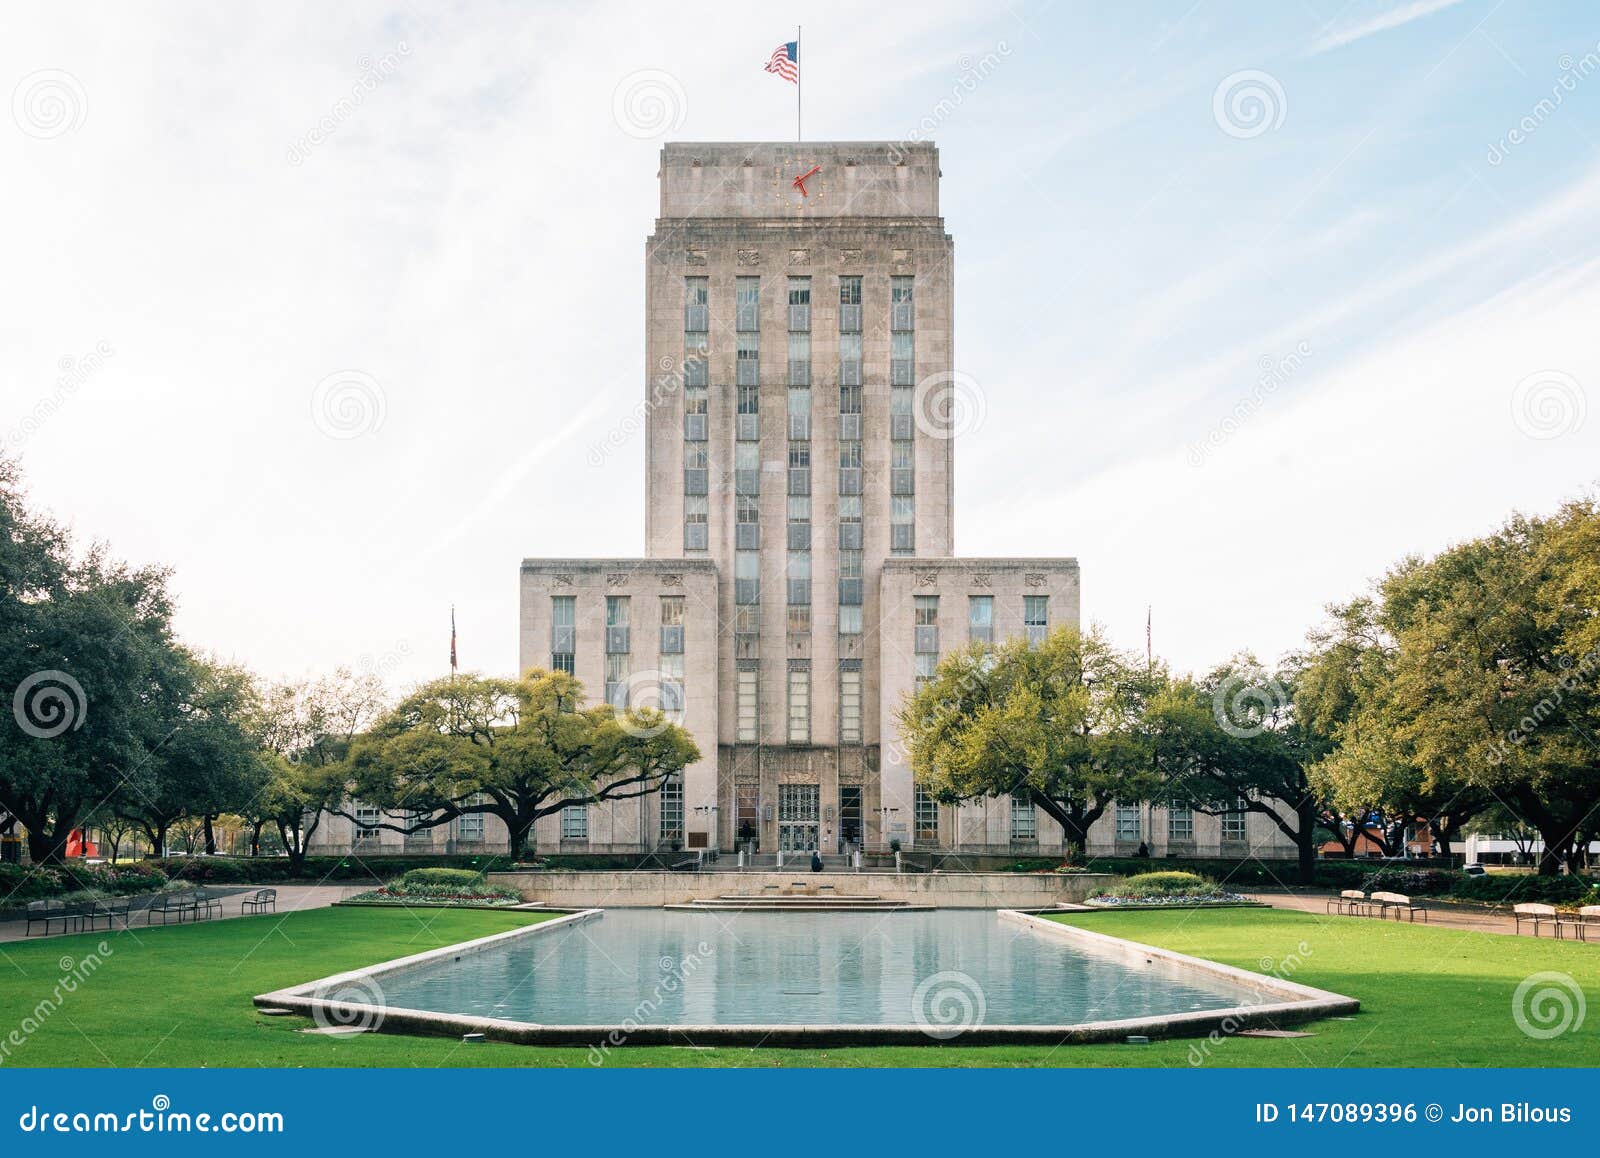 city hall, in downtown houston, texas